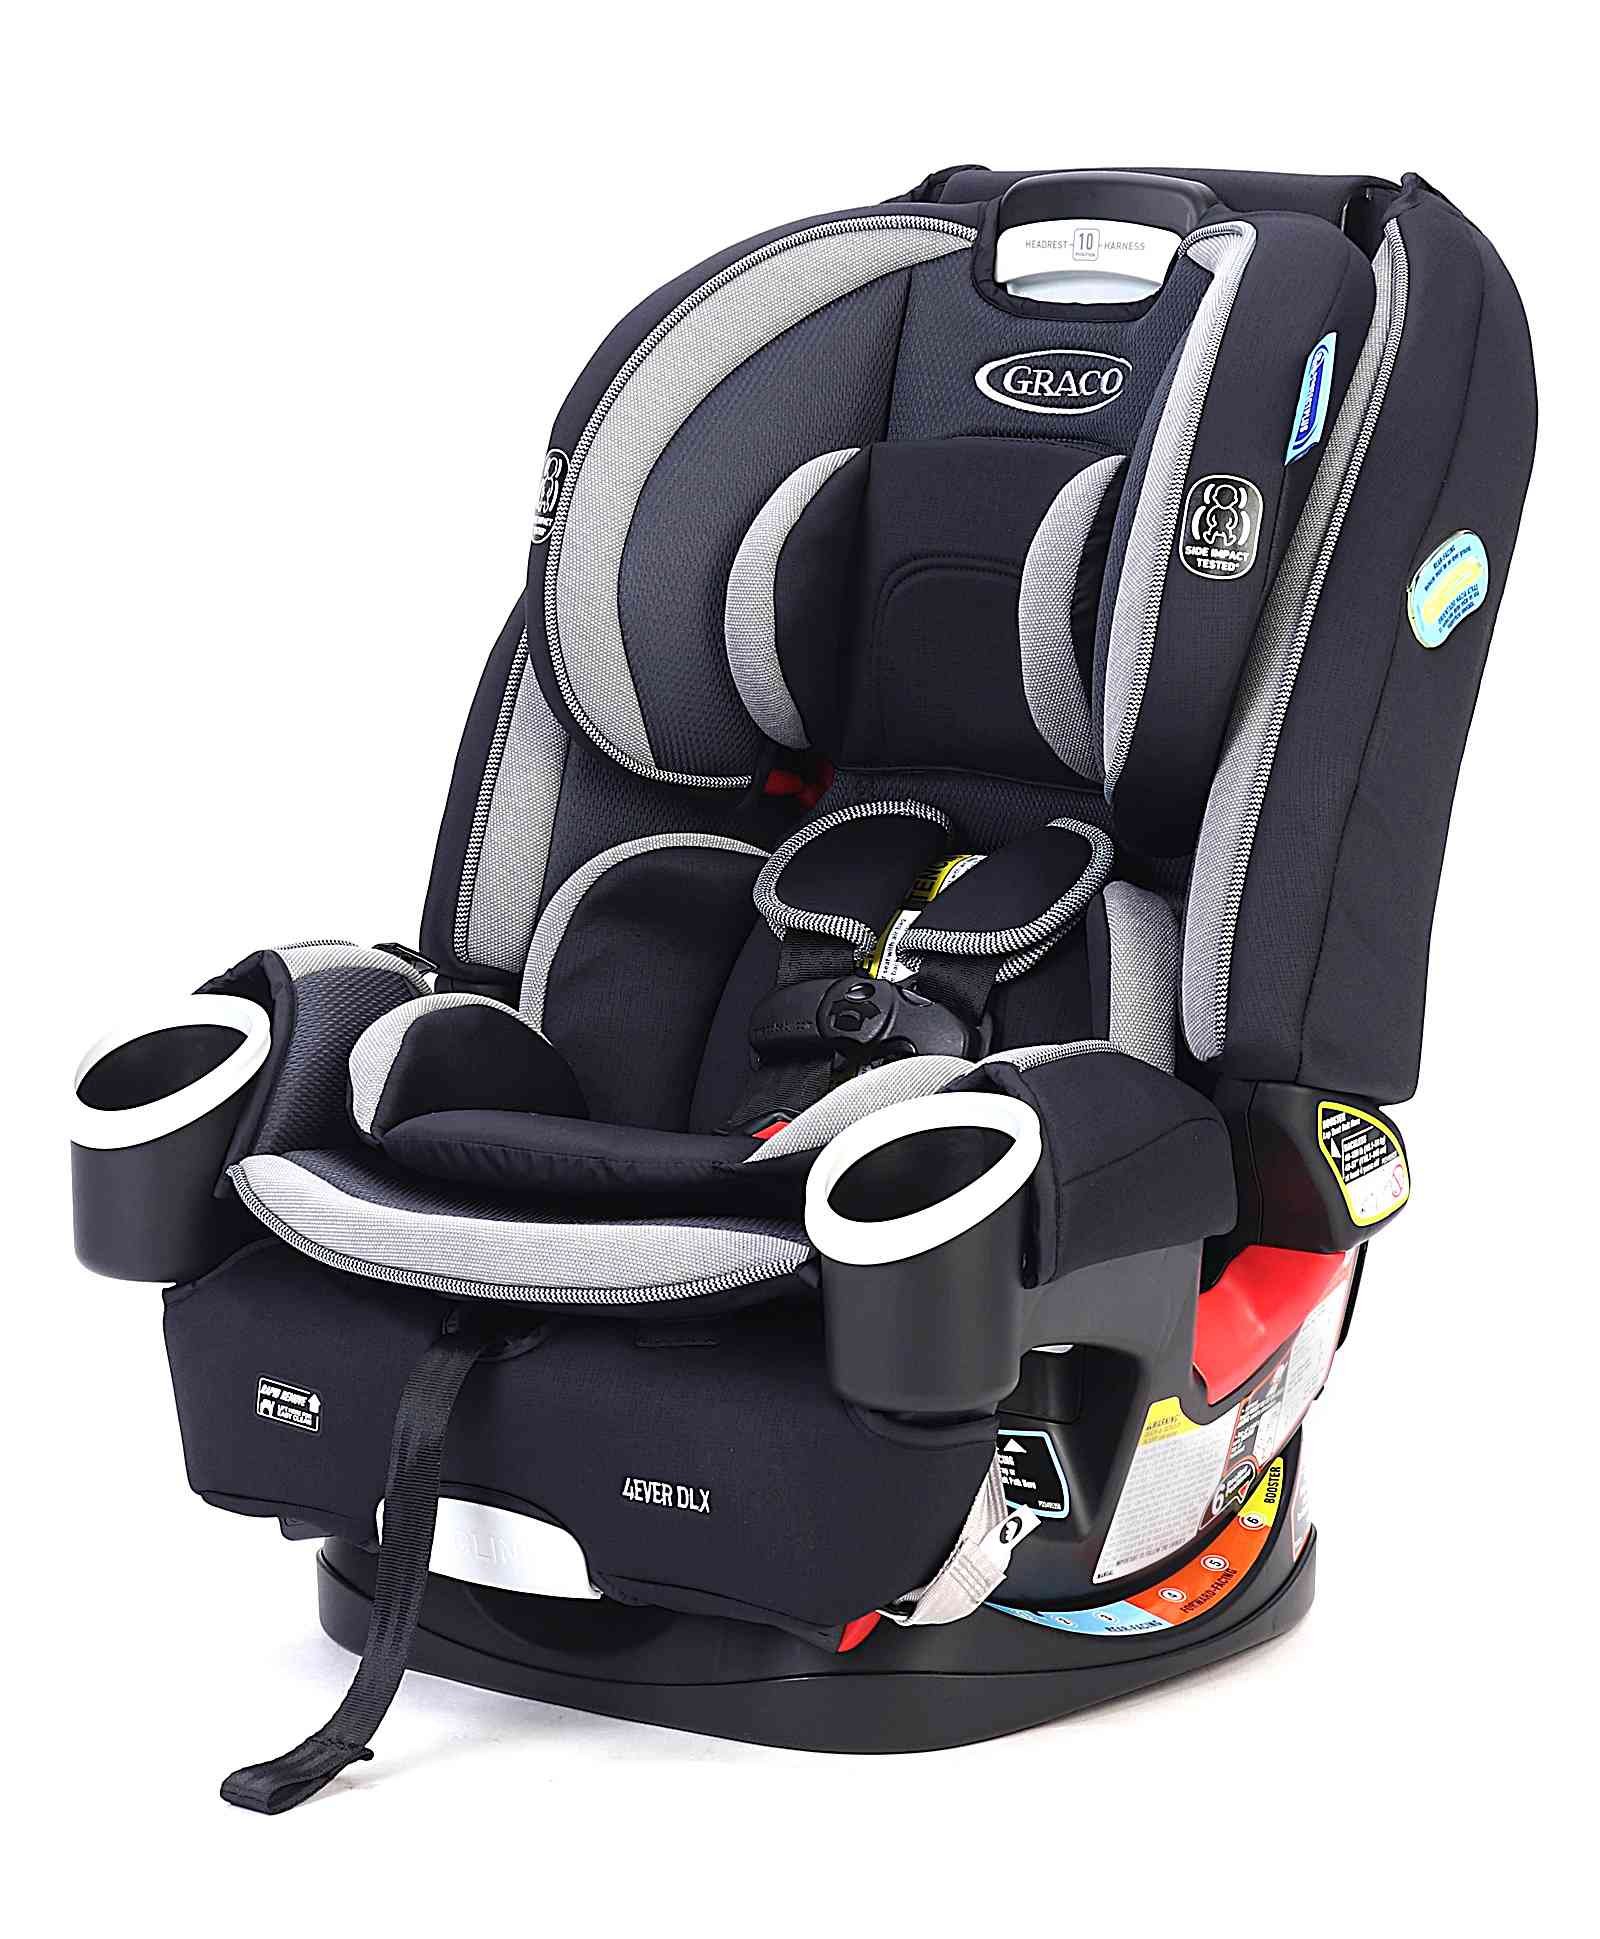 Graco 4ever Dlx 4 In 1 Convertible Infant Car Seat Aurora Black Online In India Buy At Best Price From Firstcry Com